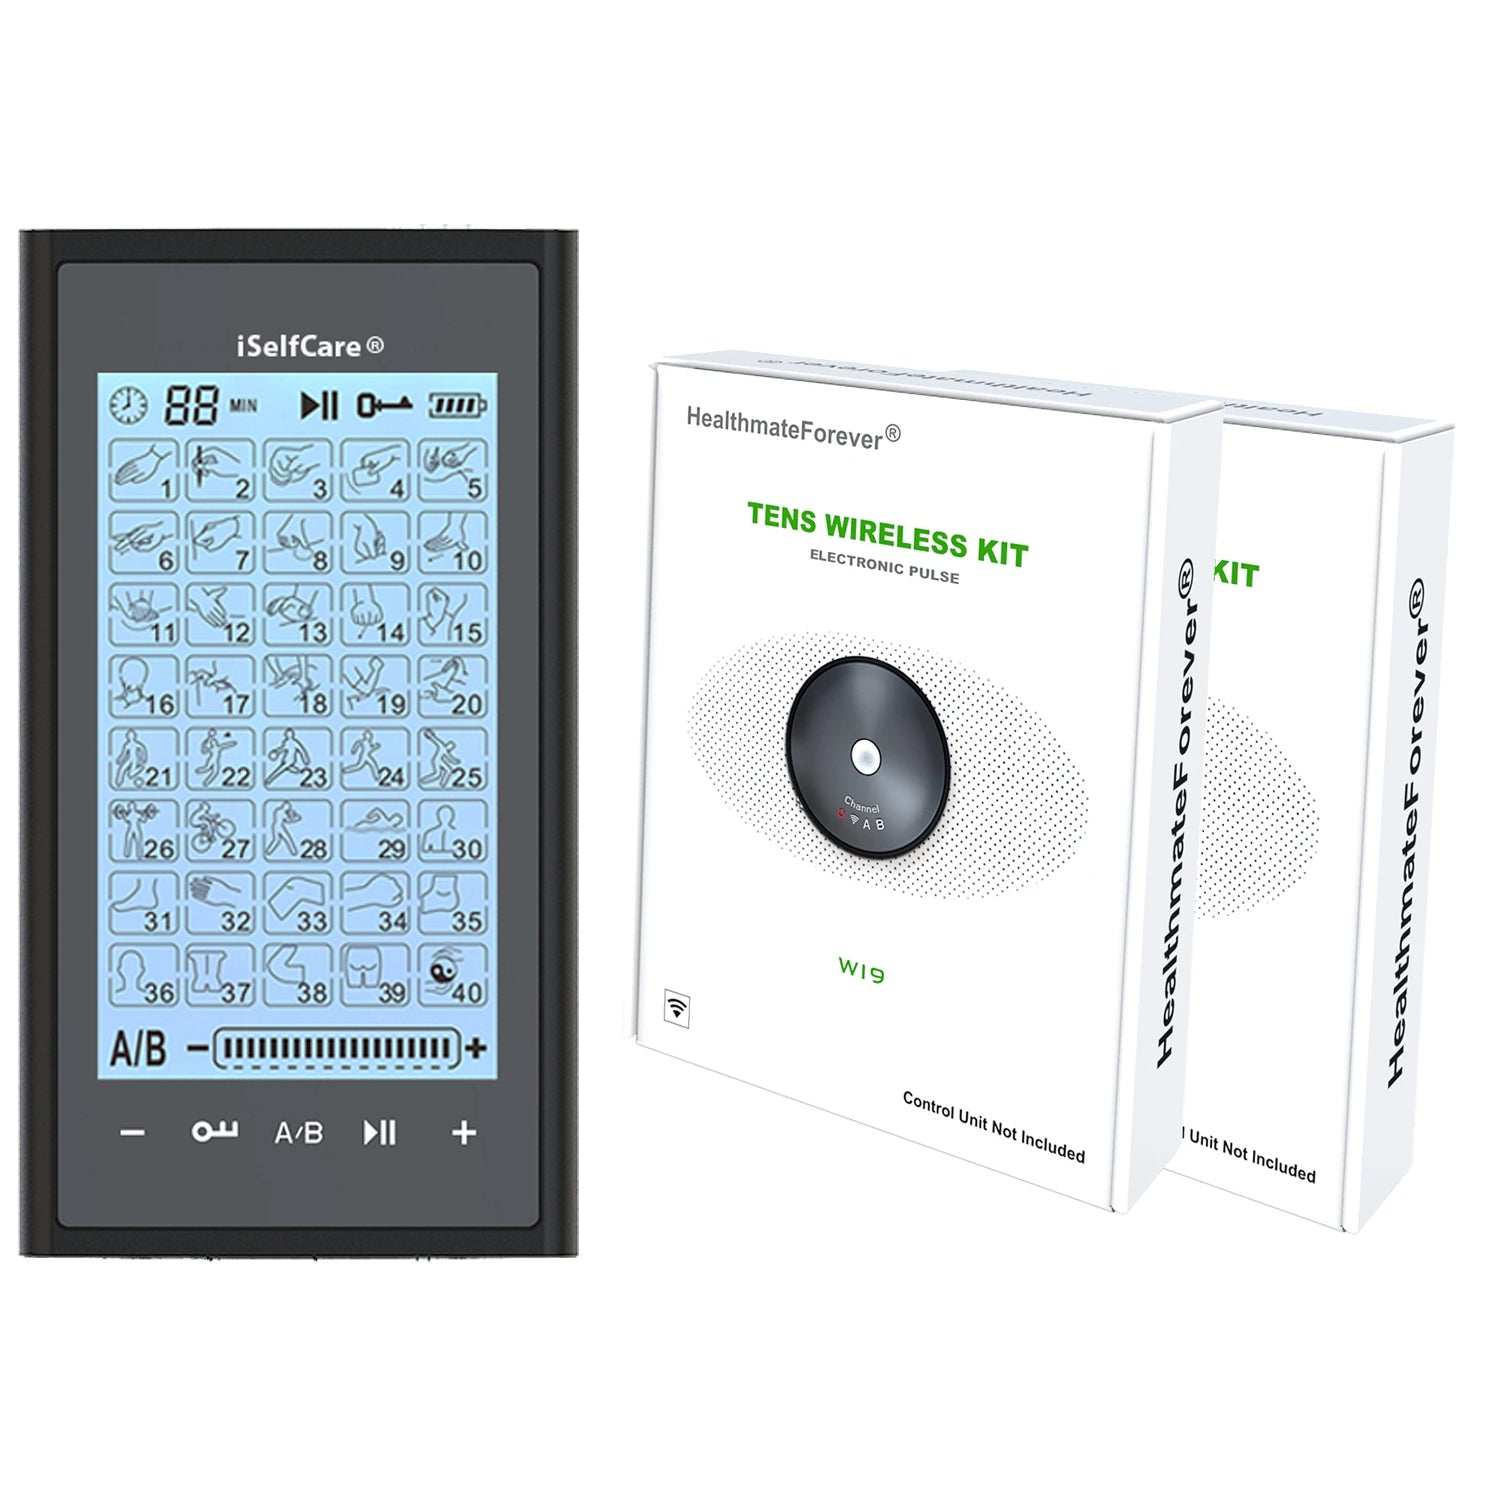 2020 Version 40 Modes T40AB2 iSelfCare® TENS unit & Muscle Stimulator - 2 Year Warranty - HealthmateForever.com